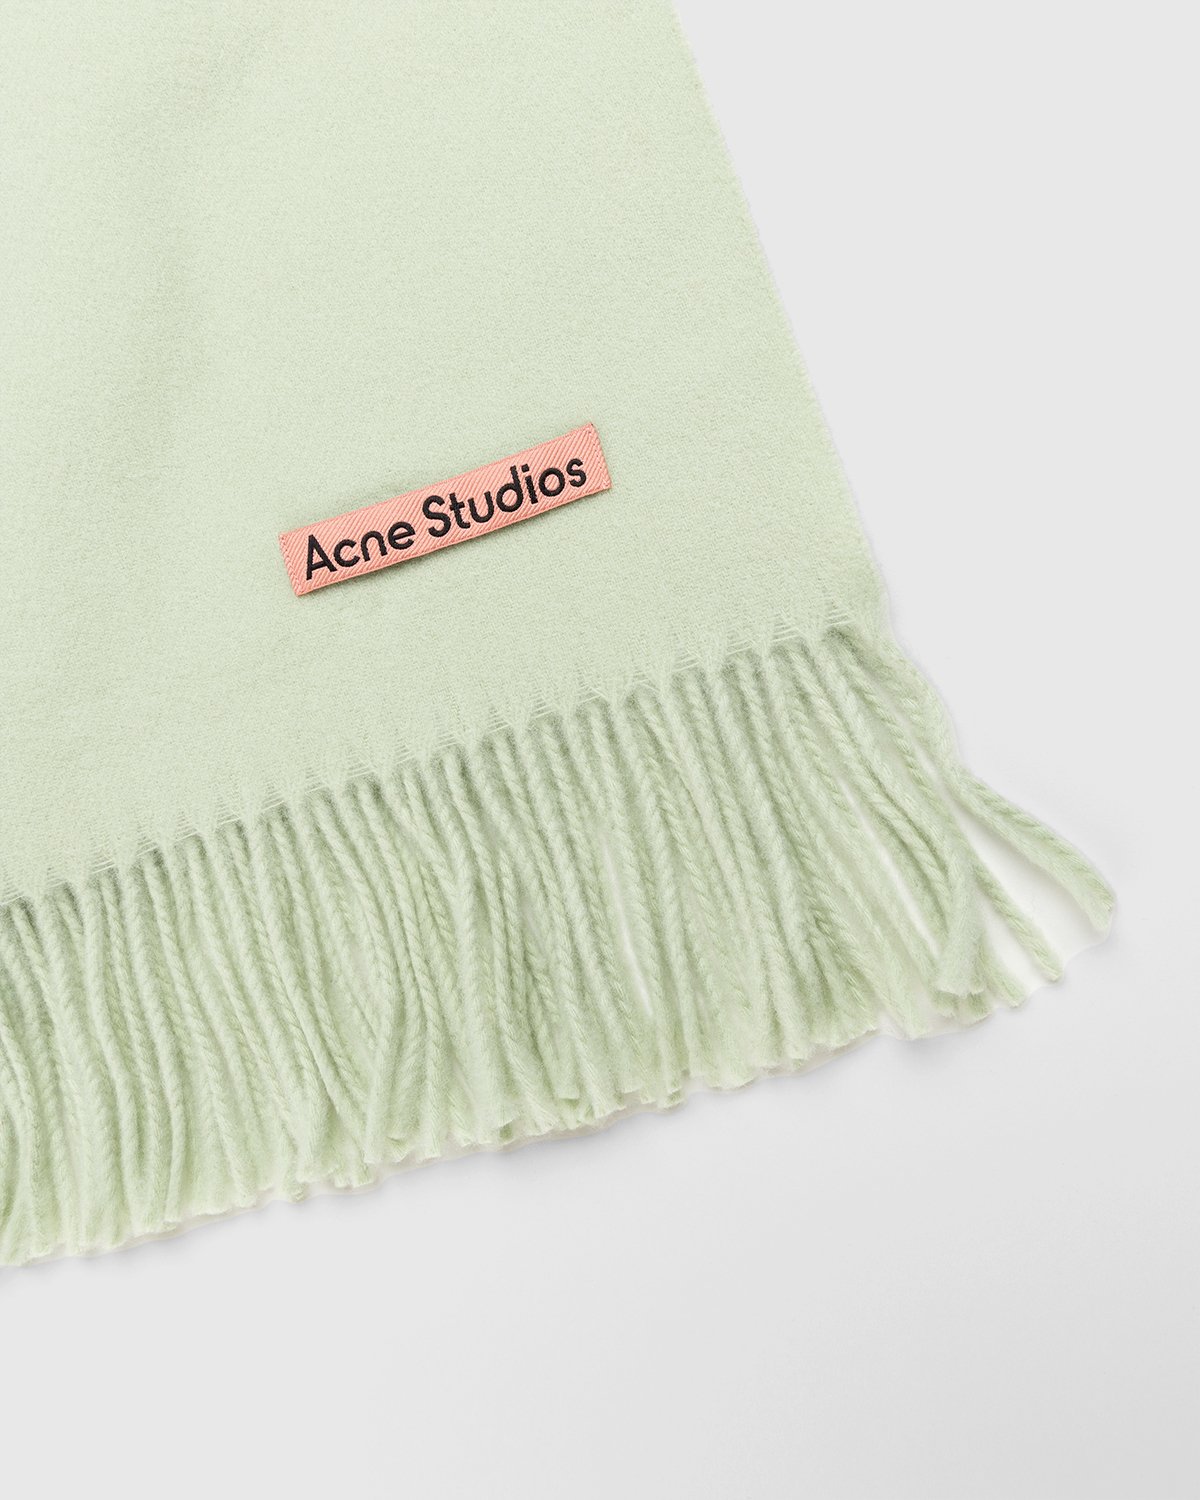 Acne Studios - Canada New Scarf Pale Green - Accessories - Green - Image 3